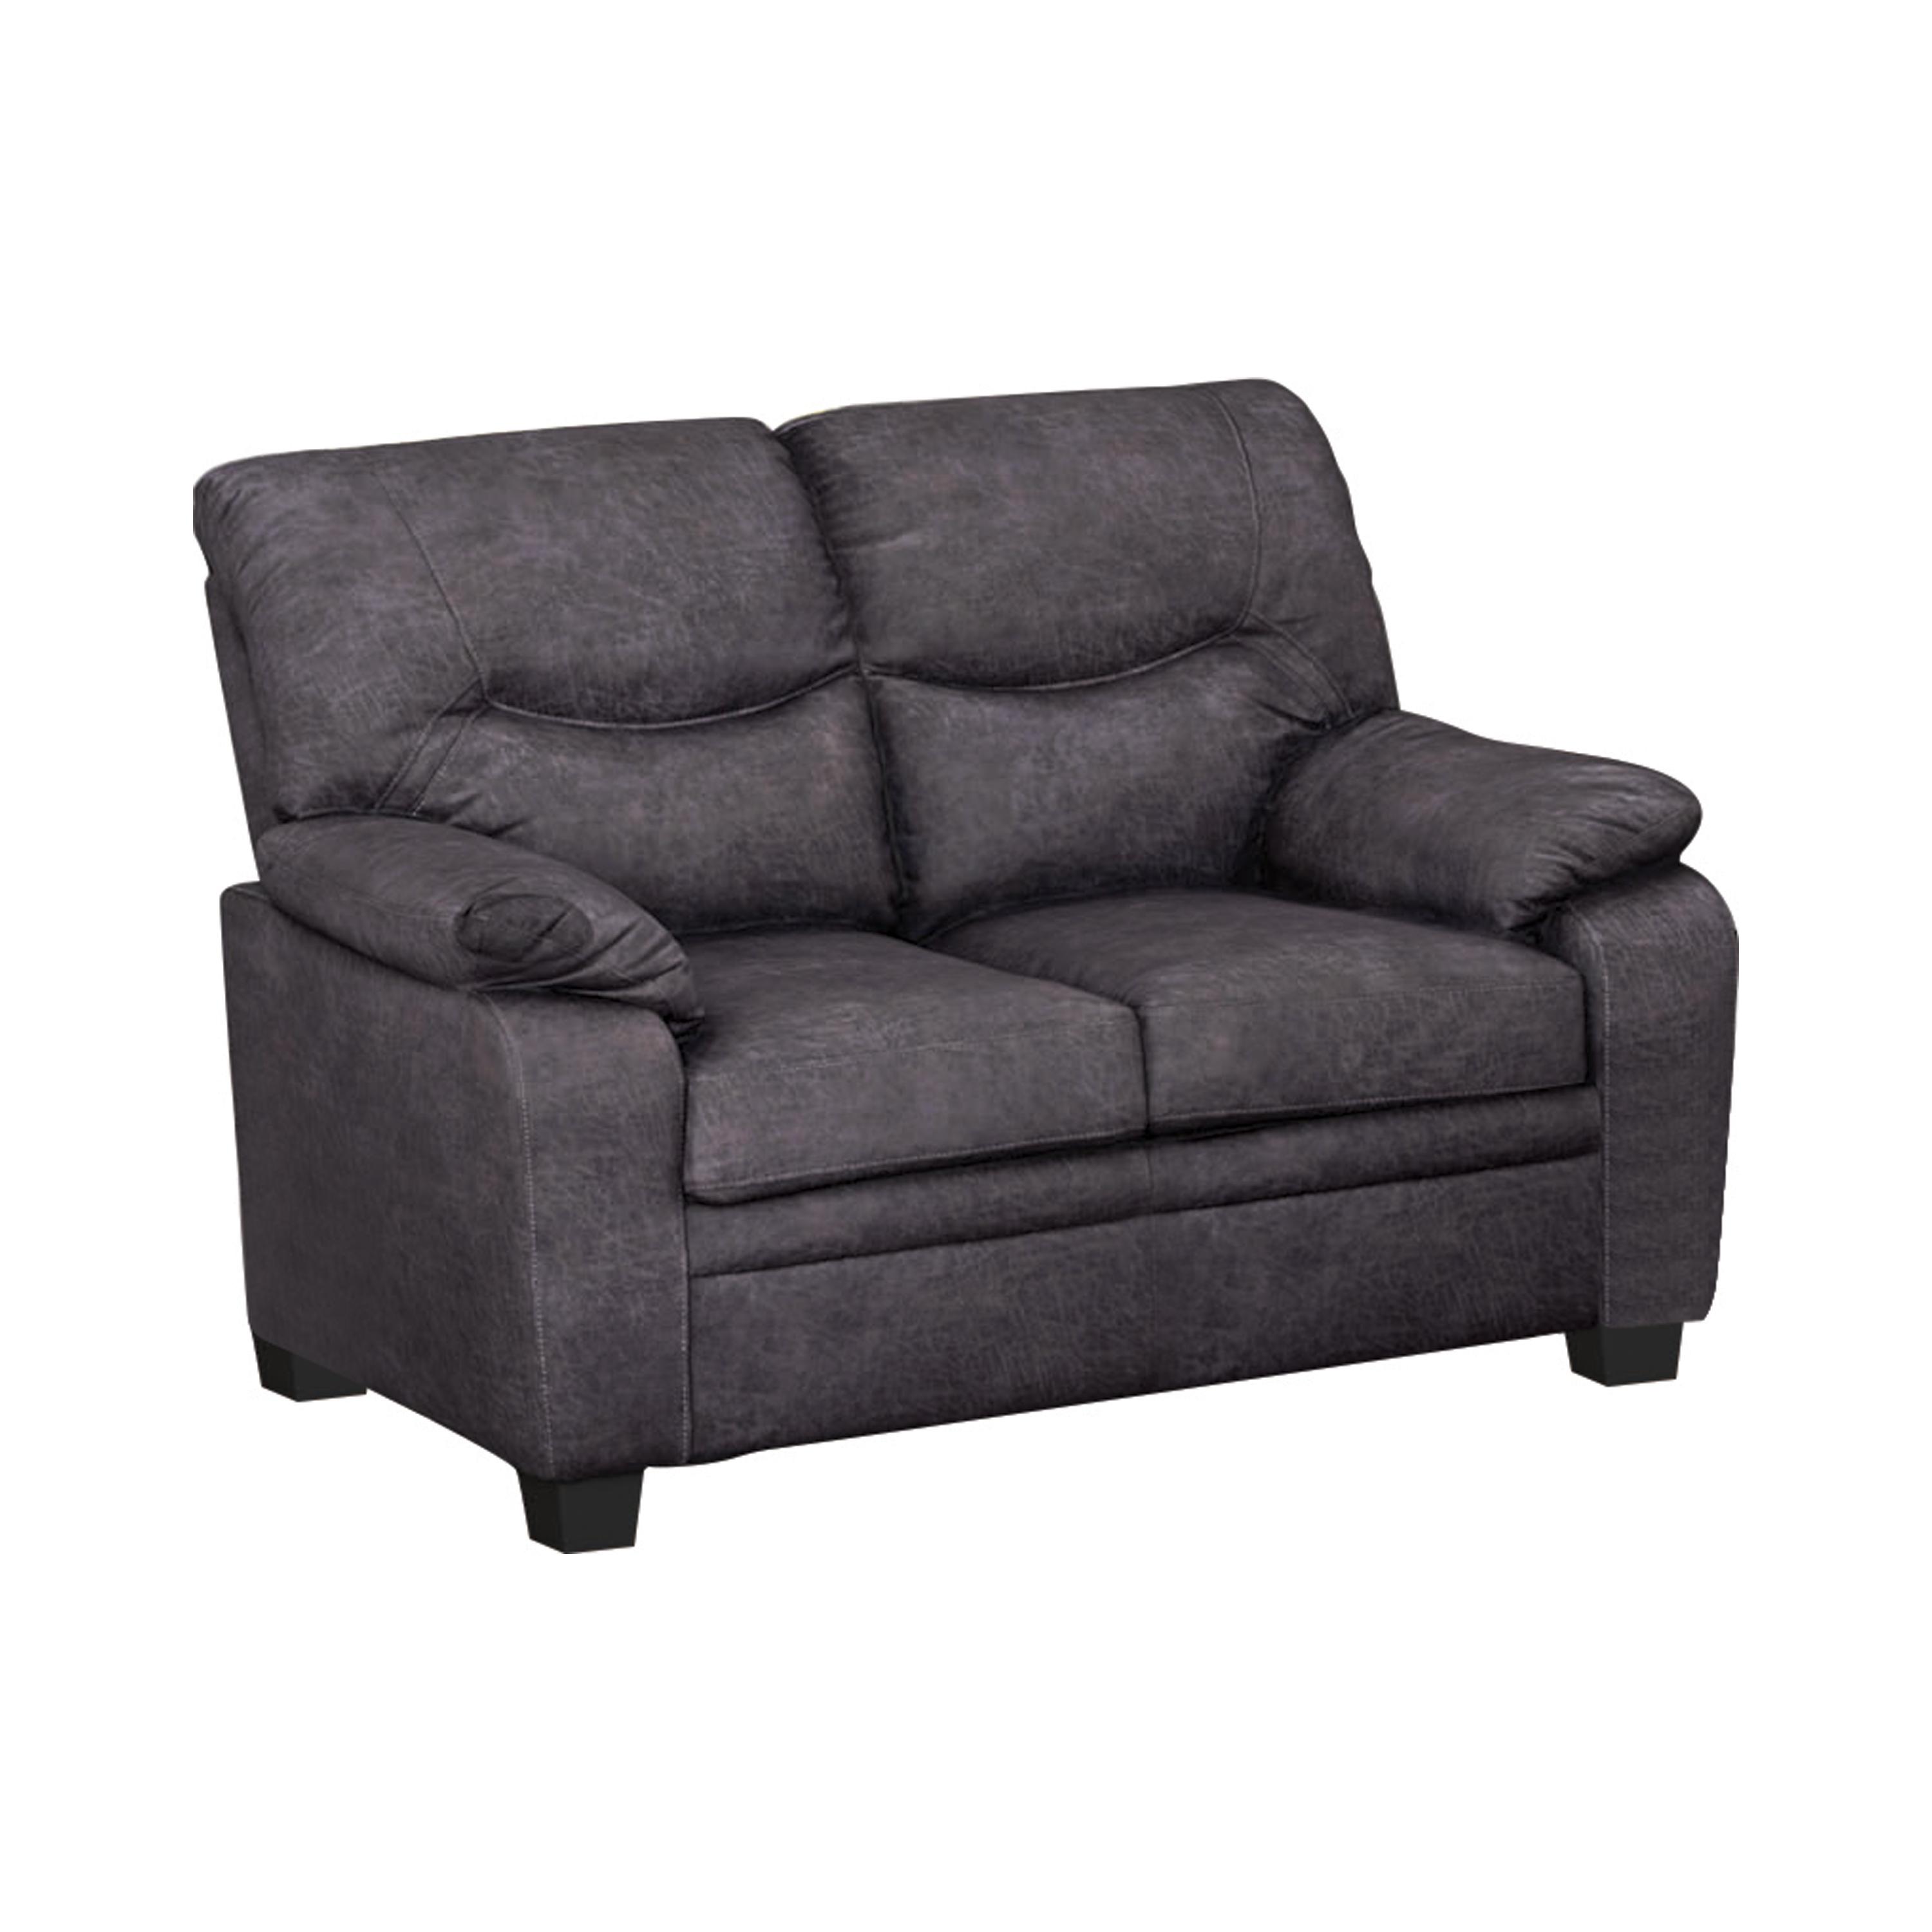 Classic Loveseat 506565 Meagan 506565 in Charcoal 